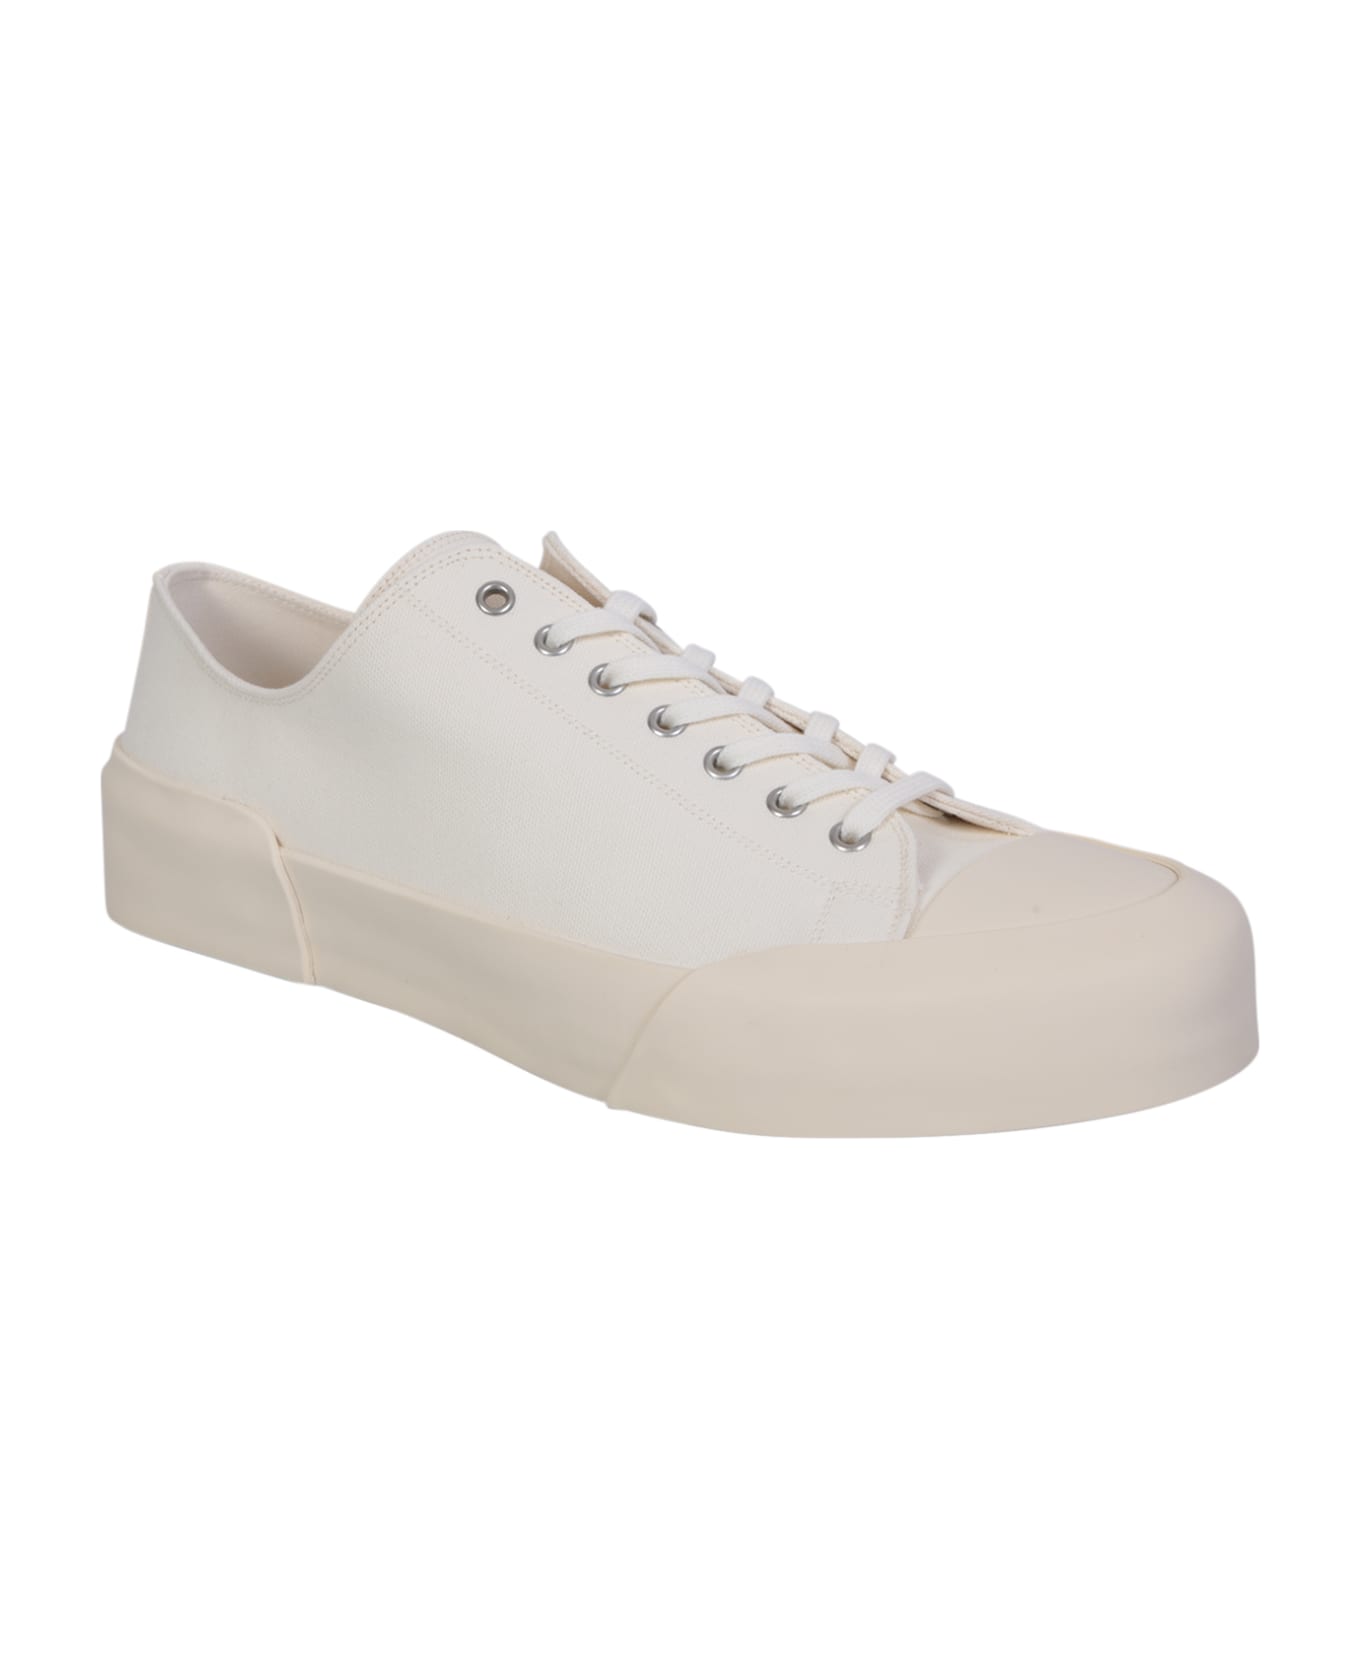 Jil Sander White Lace-up Low Top Sneakers - NATURAL